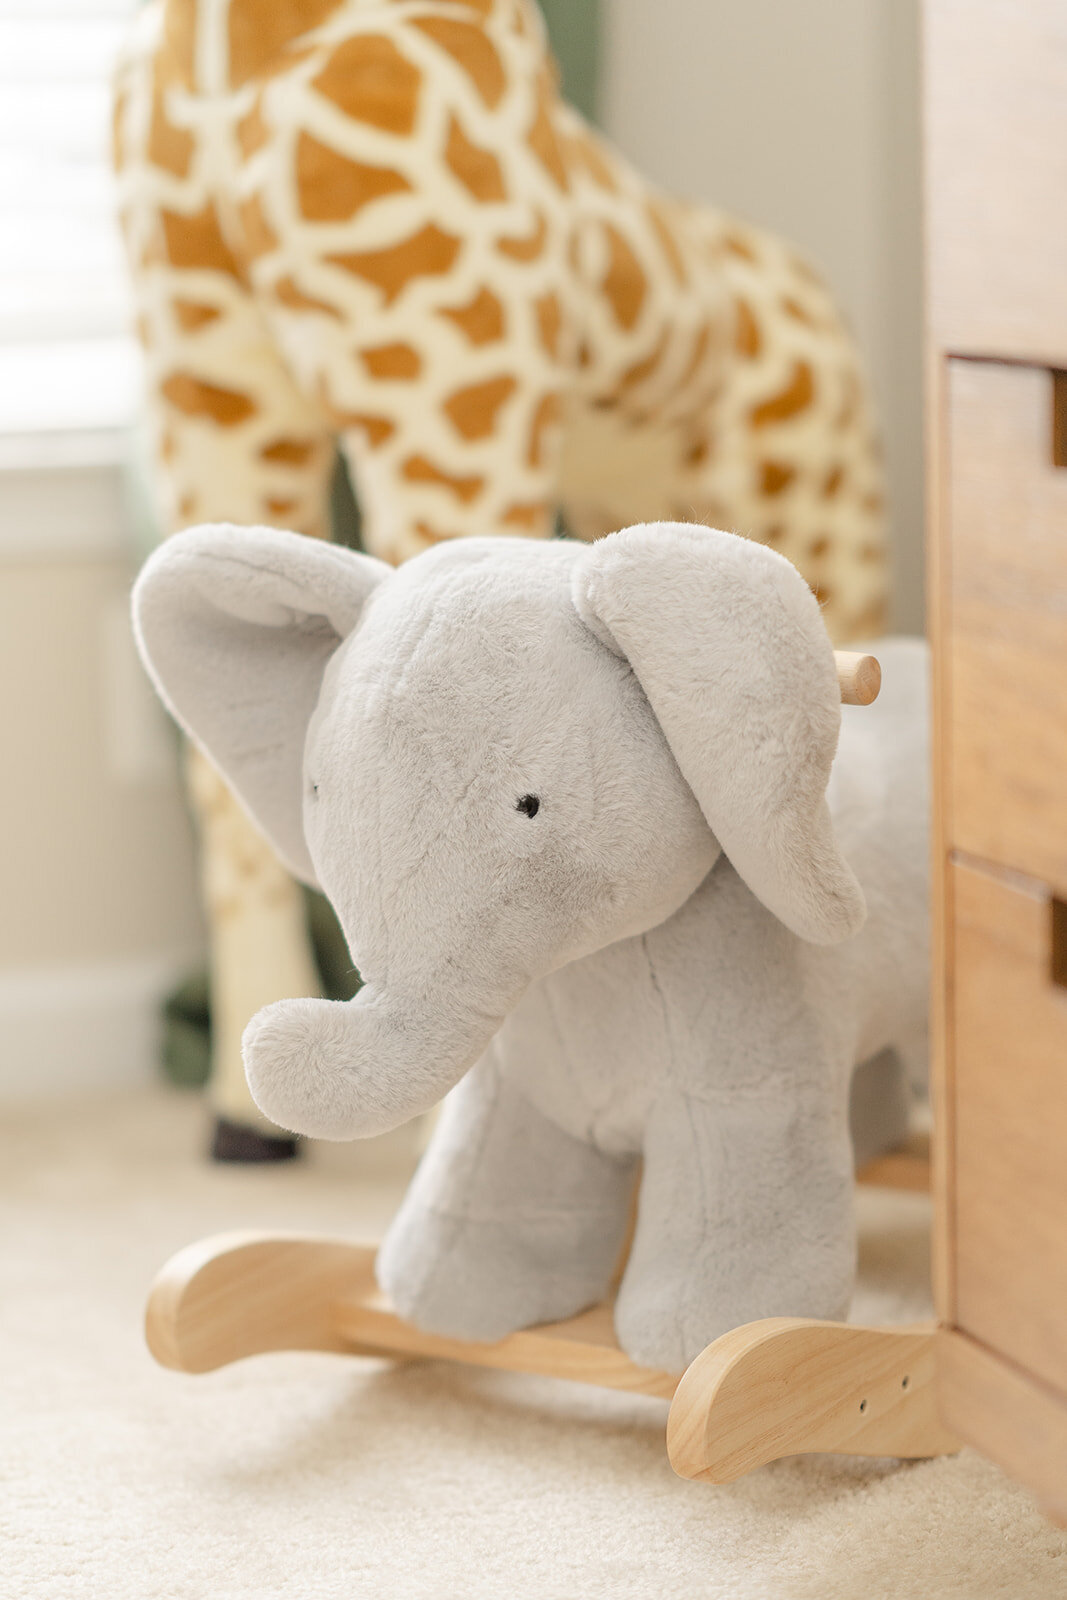 Elephant, a rocking toy, taken by Leesburg, Virginia product photographer